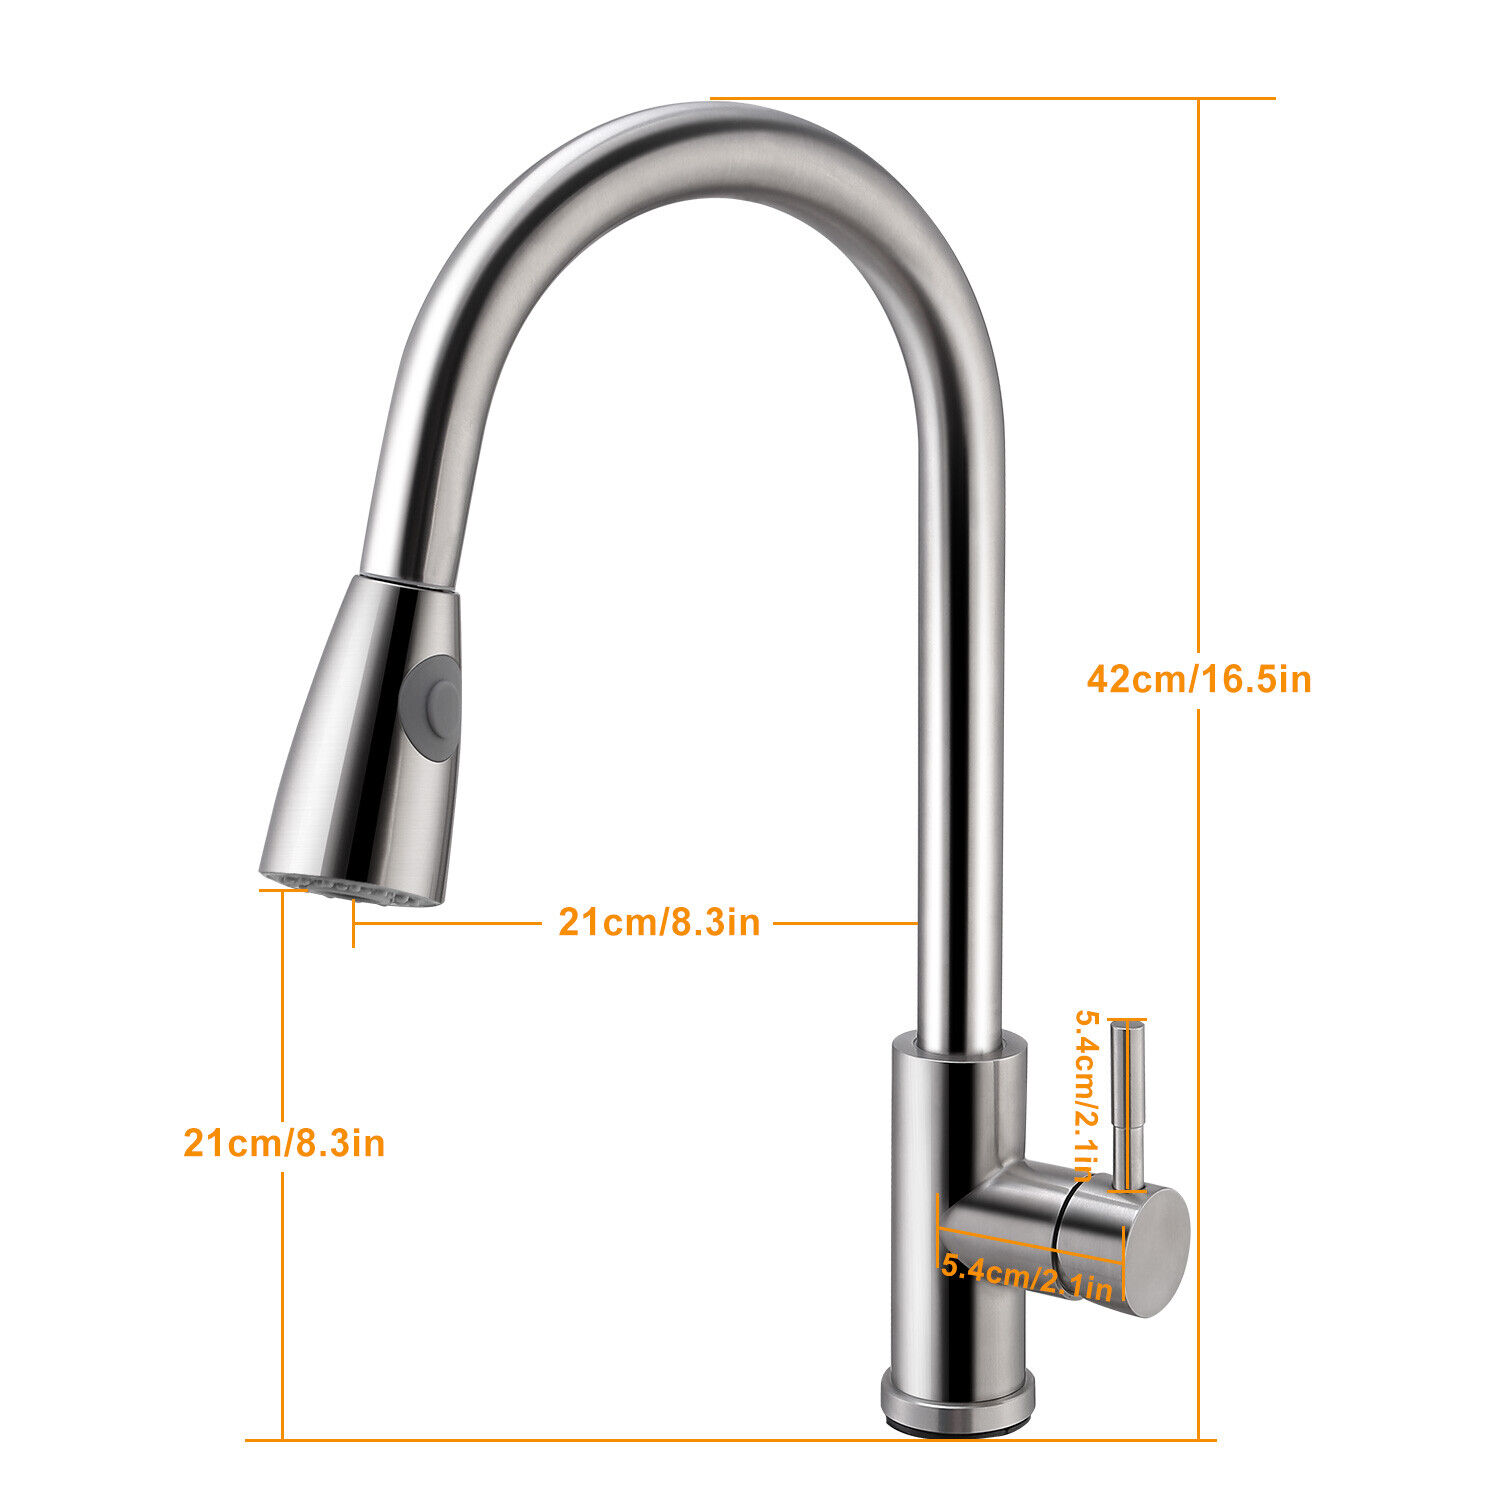 imountek Kitchen Sink Faucets Pull Out Mixer Taps Brushed Nickel Hot/Cold Water Control